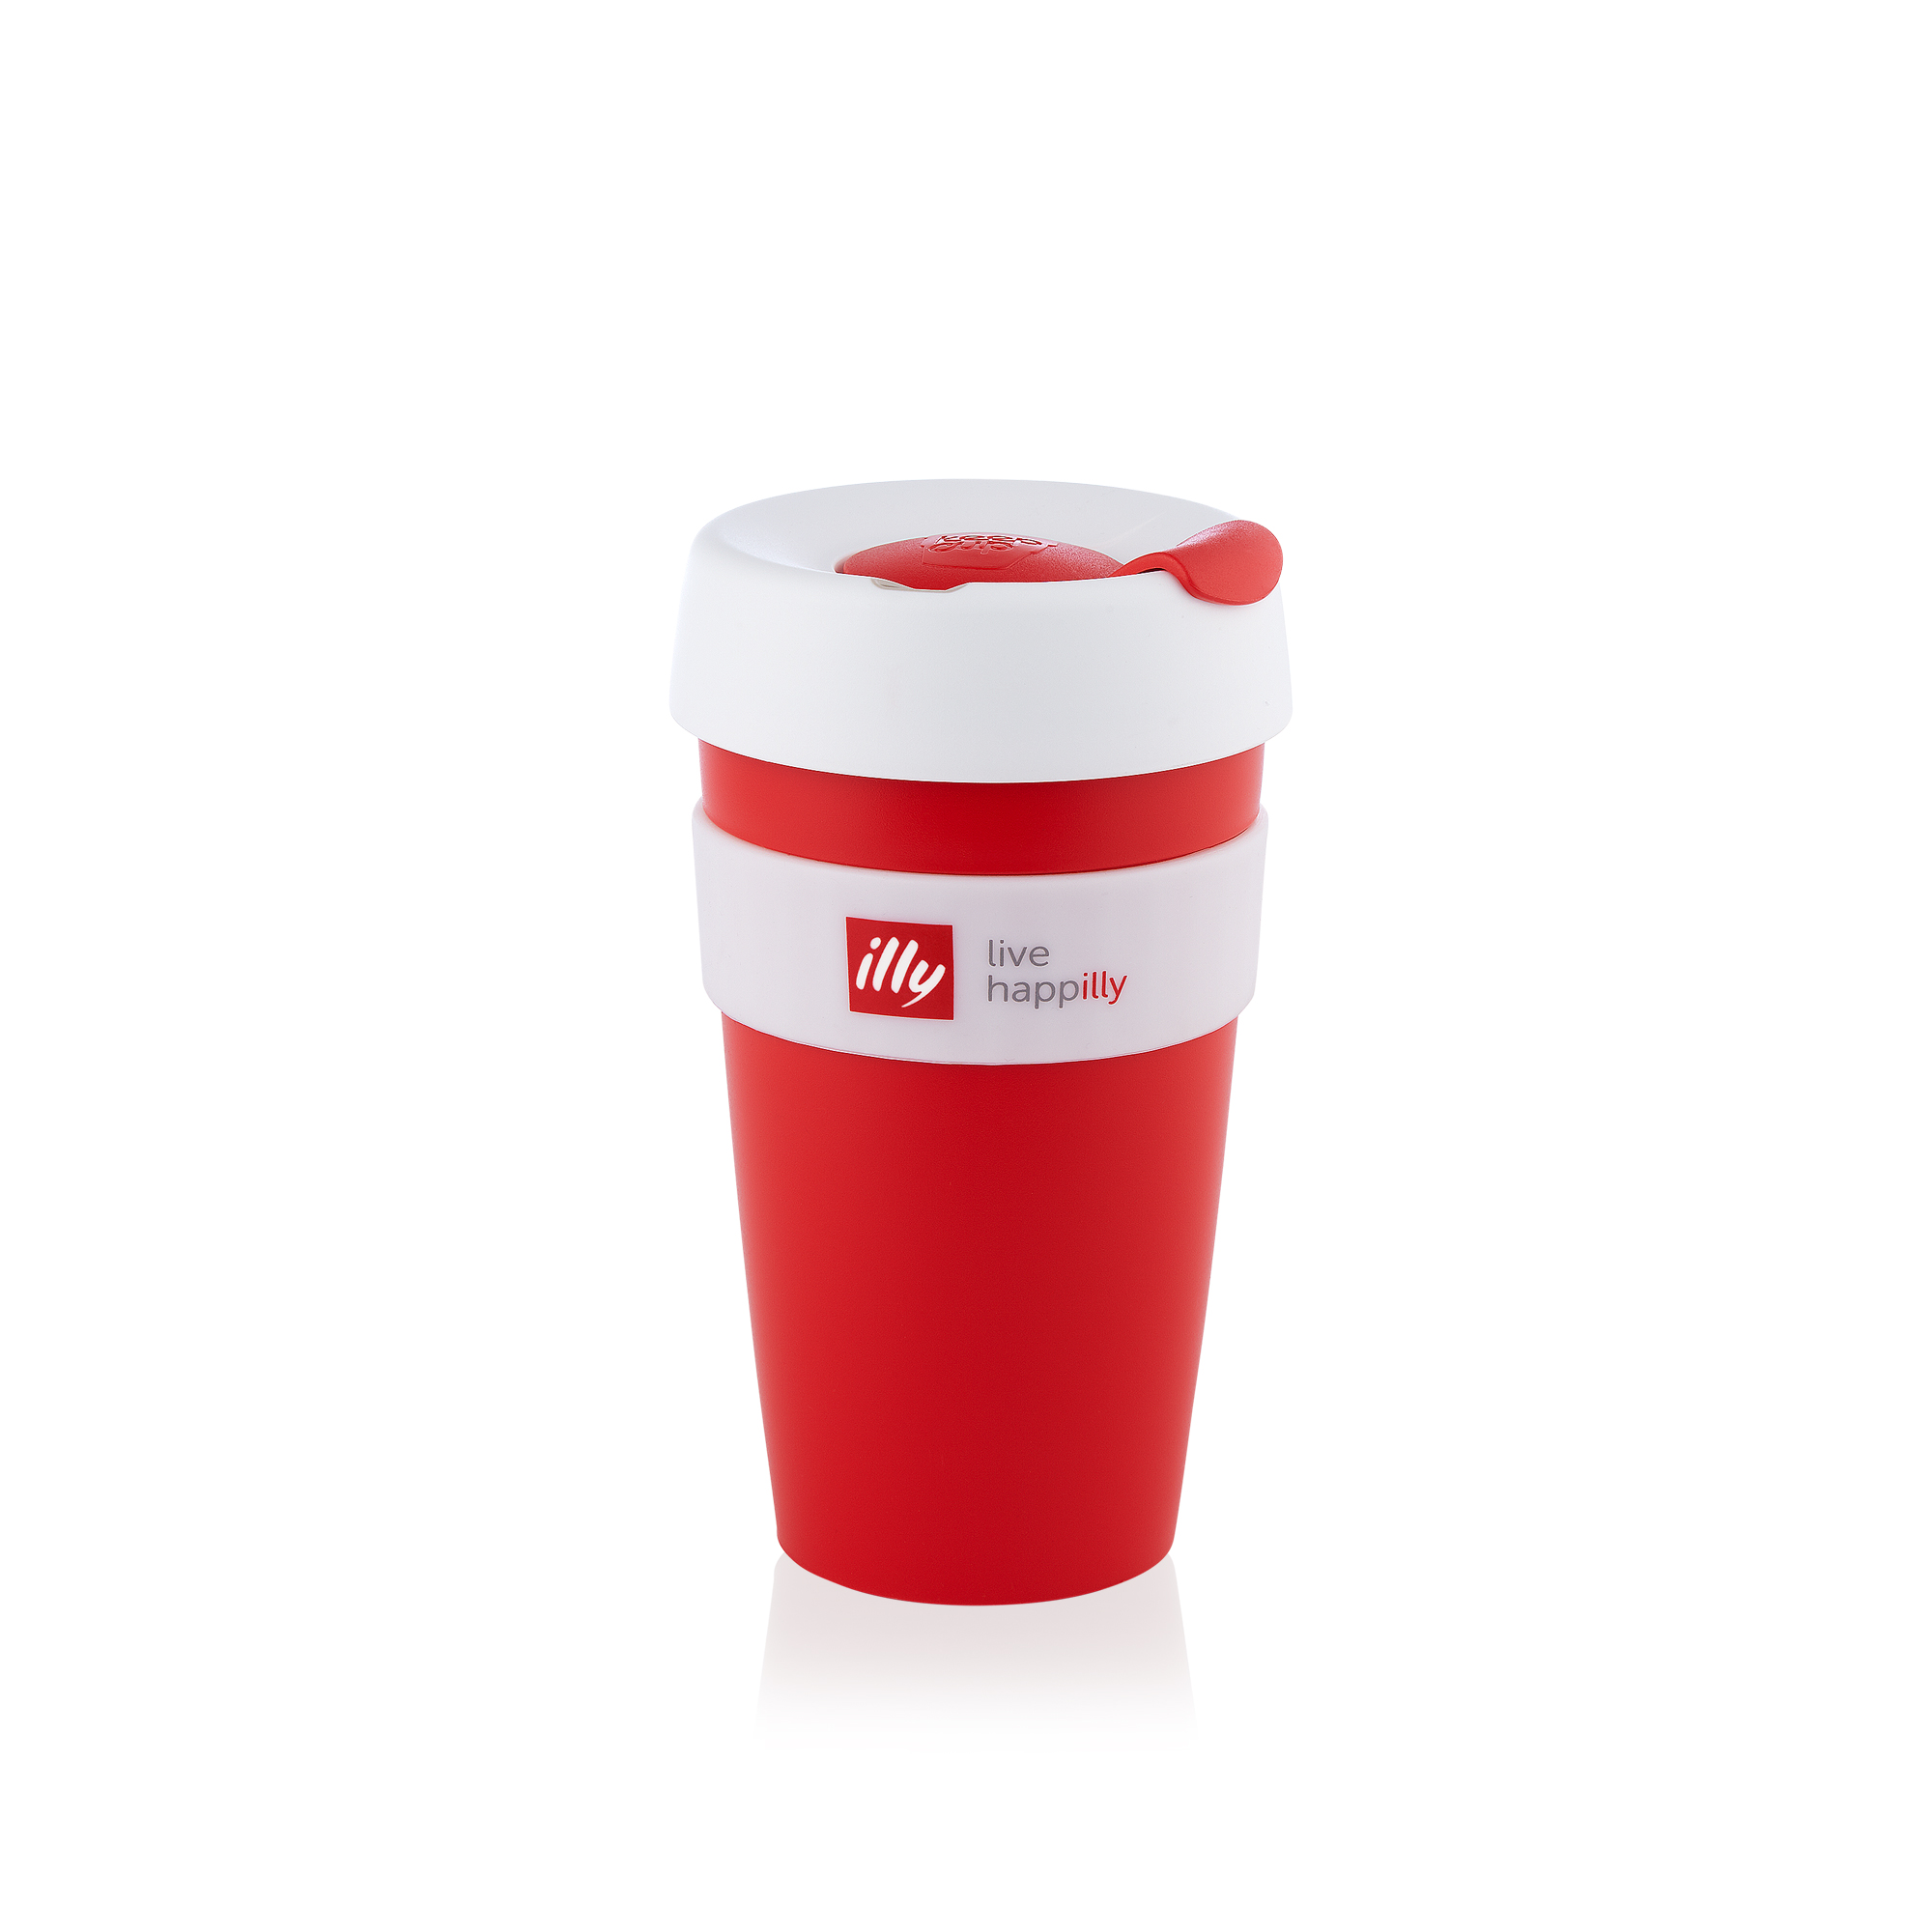 illy Live HAPPilly KeepCup - Red and White